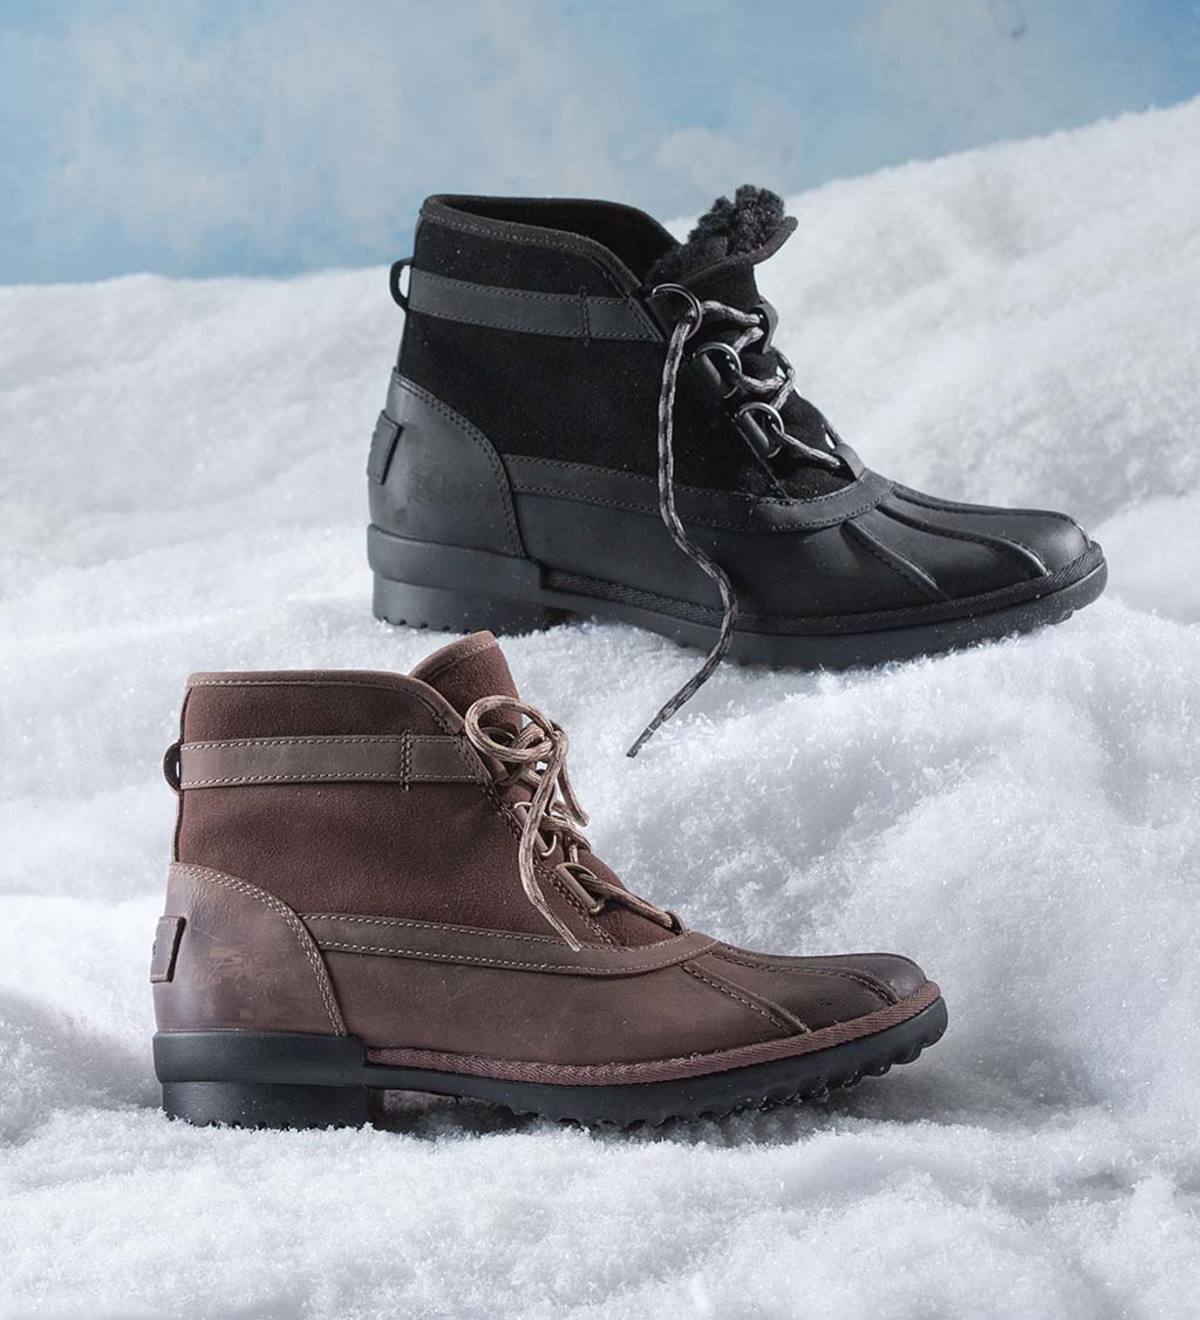 ugg duck boots mens